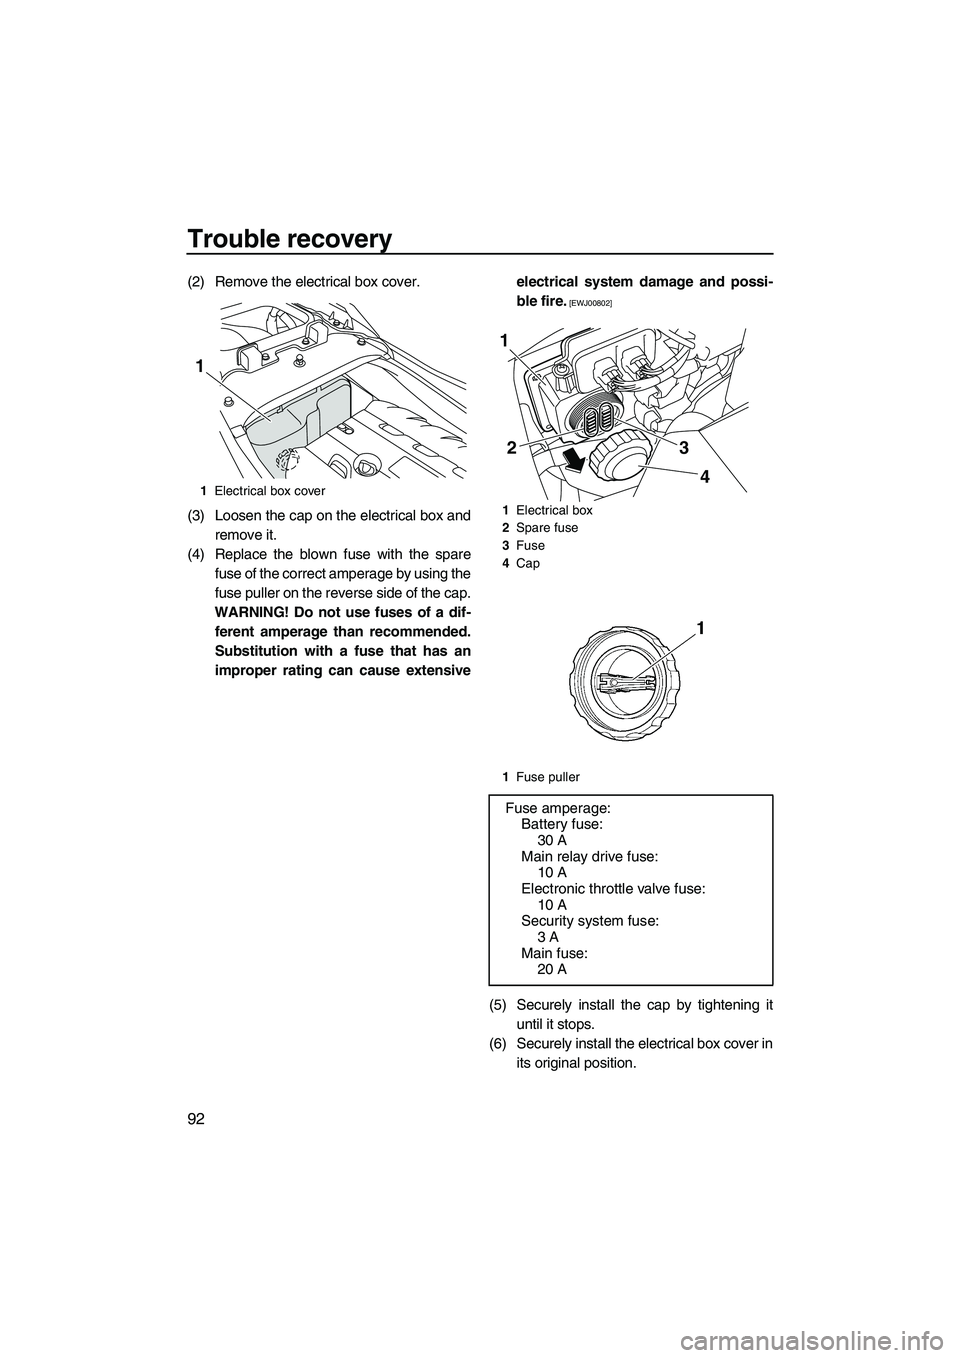 YAMAHA FZR 2012  Owners Manual Trouble recovery
92
(2) Remove the electrical box cover.
(3) Loosen the cap on the electrical box and
remove it.
(4) Replace the blown fuse with the spare
fuse of the correct amperage by using the
fus